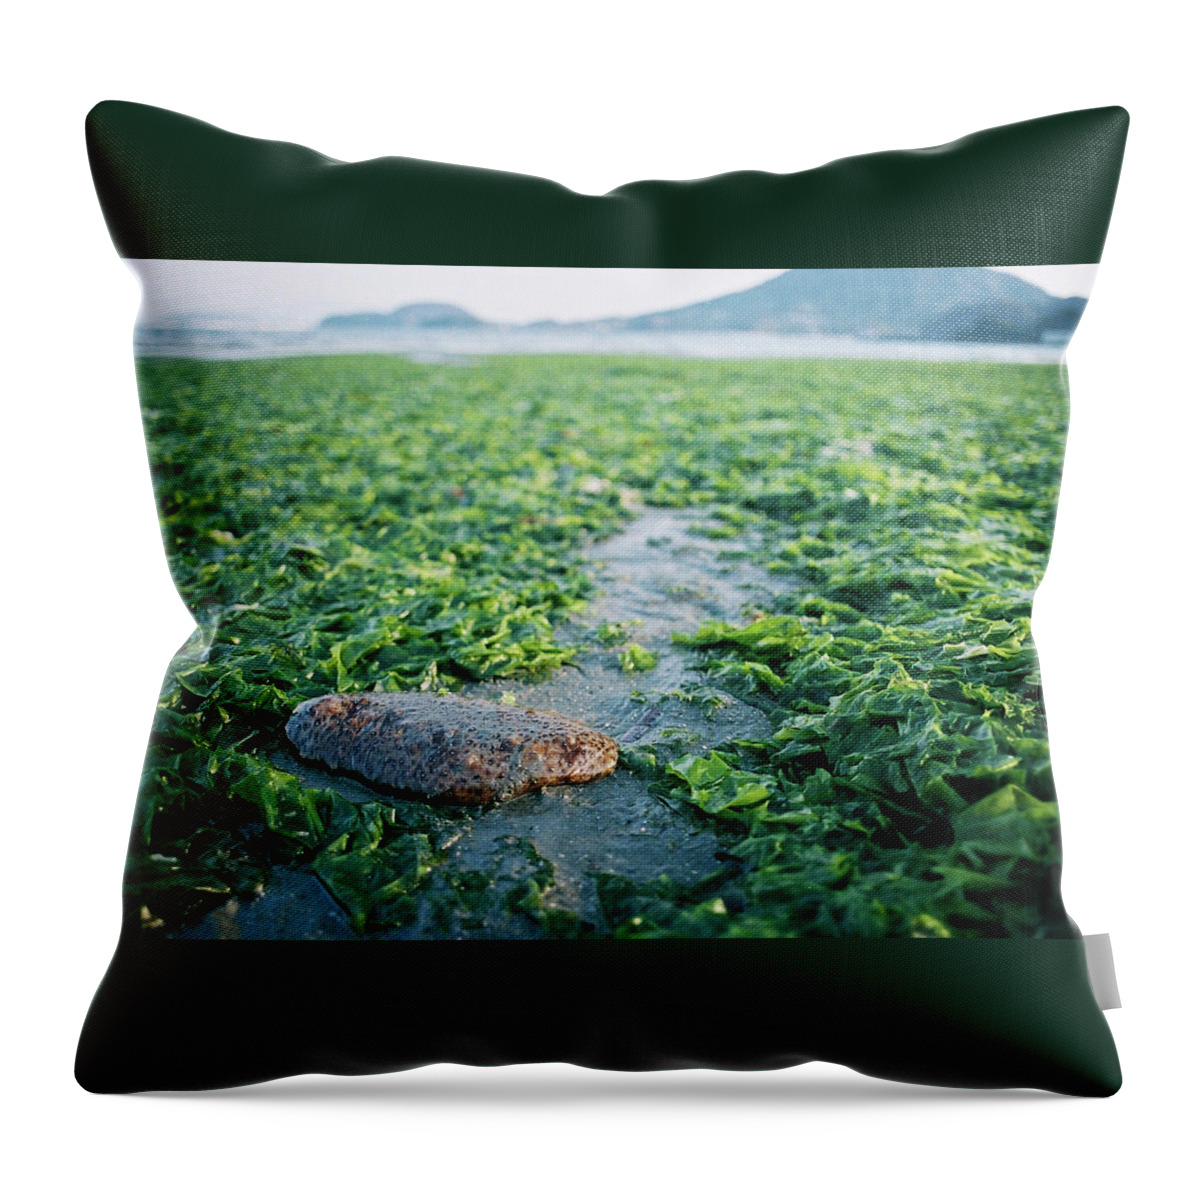 Seaweed Throw Pillow featuring the photograph Sea Cucumber by Breeze.kaze